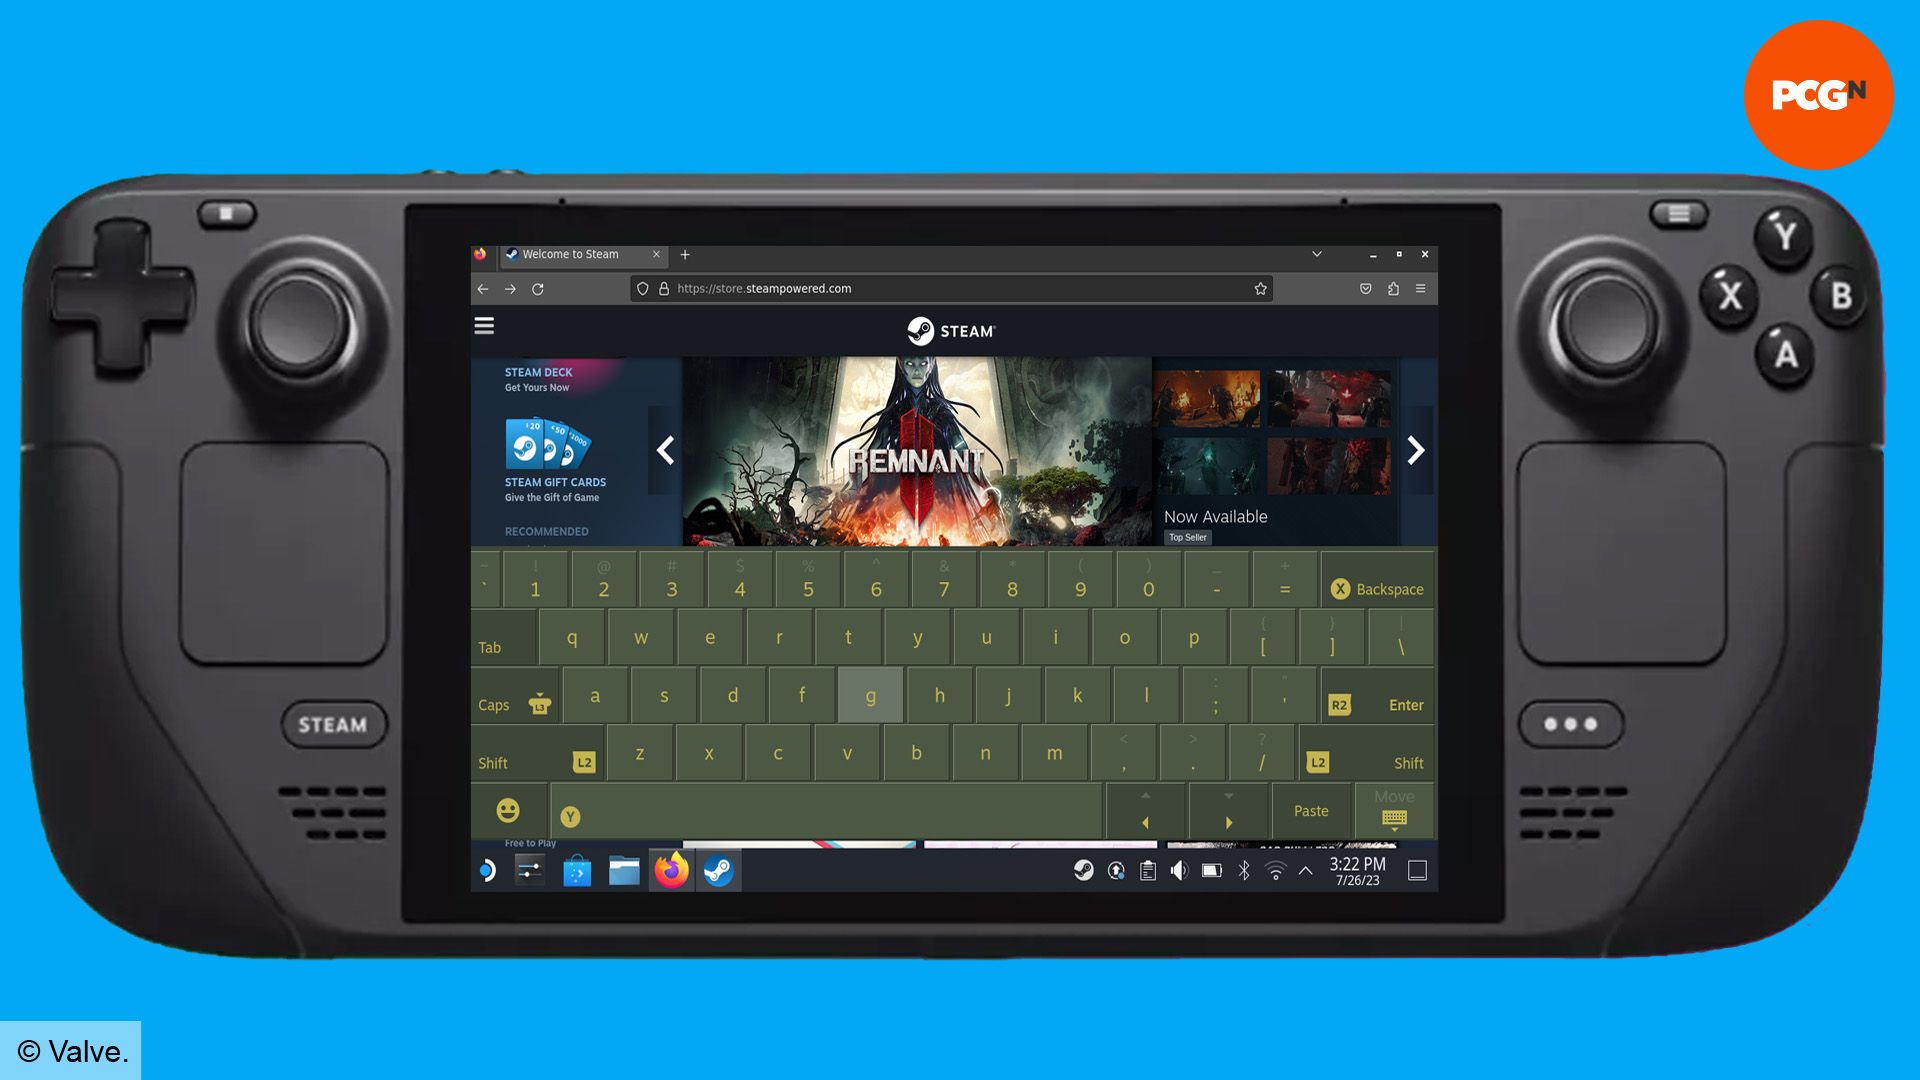 How to use the Steam Deck keyboard in desktop mode